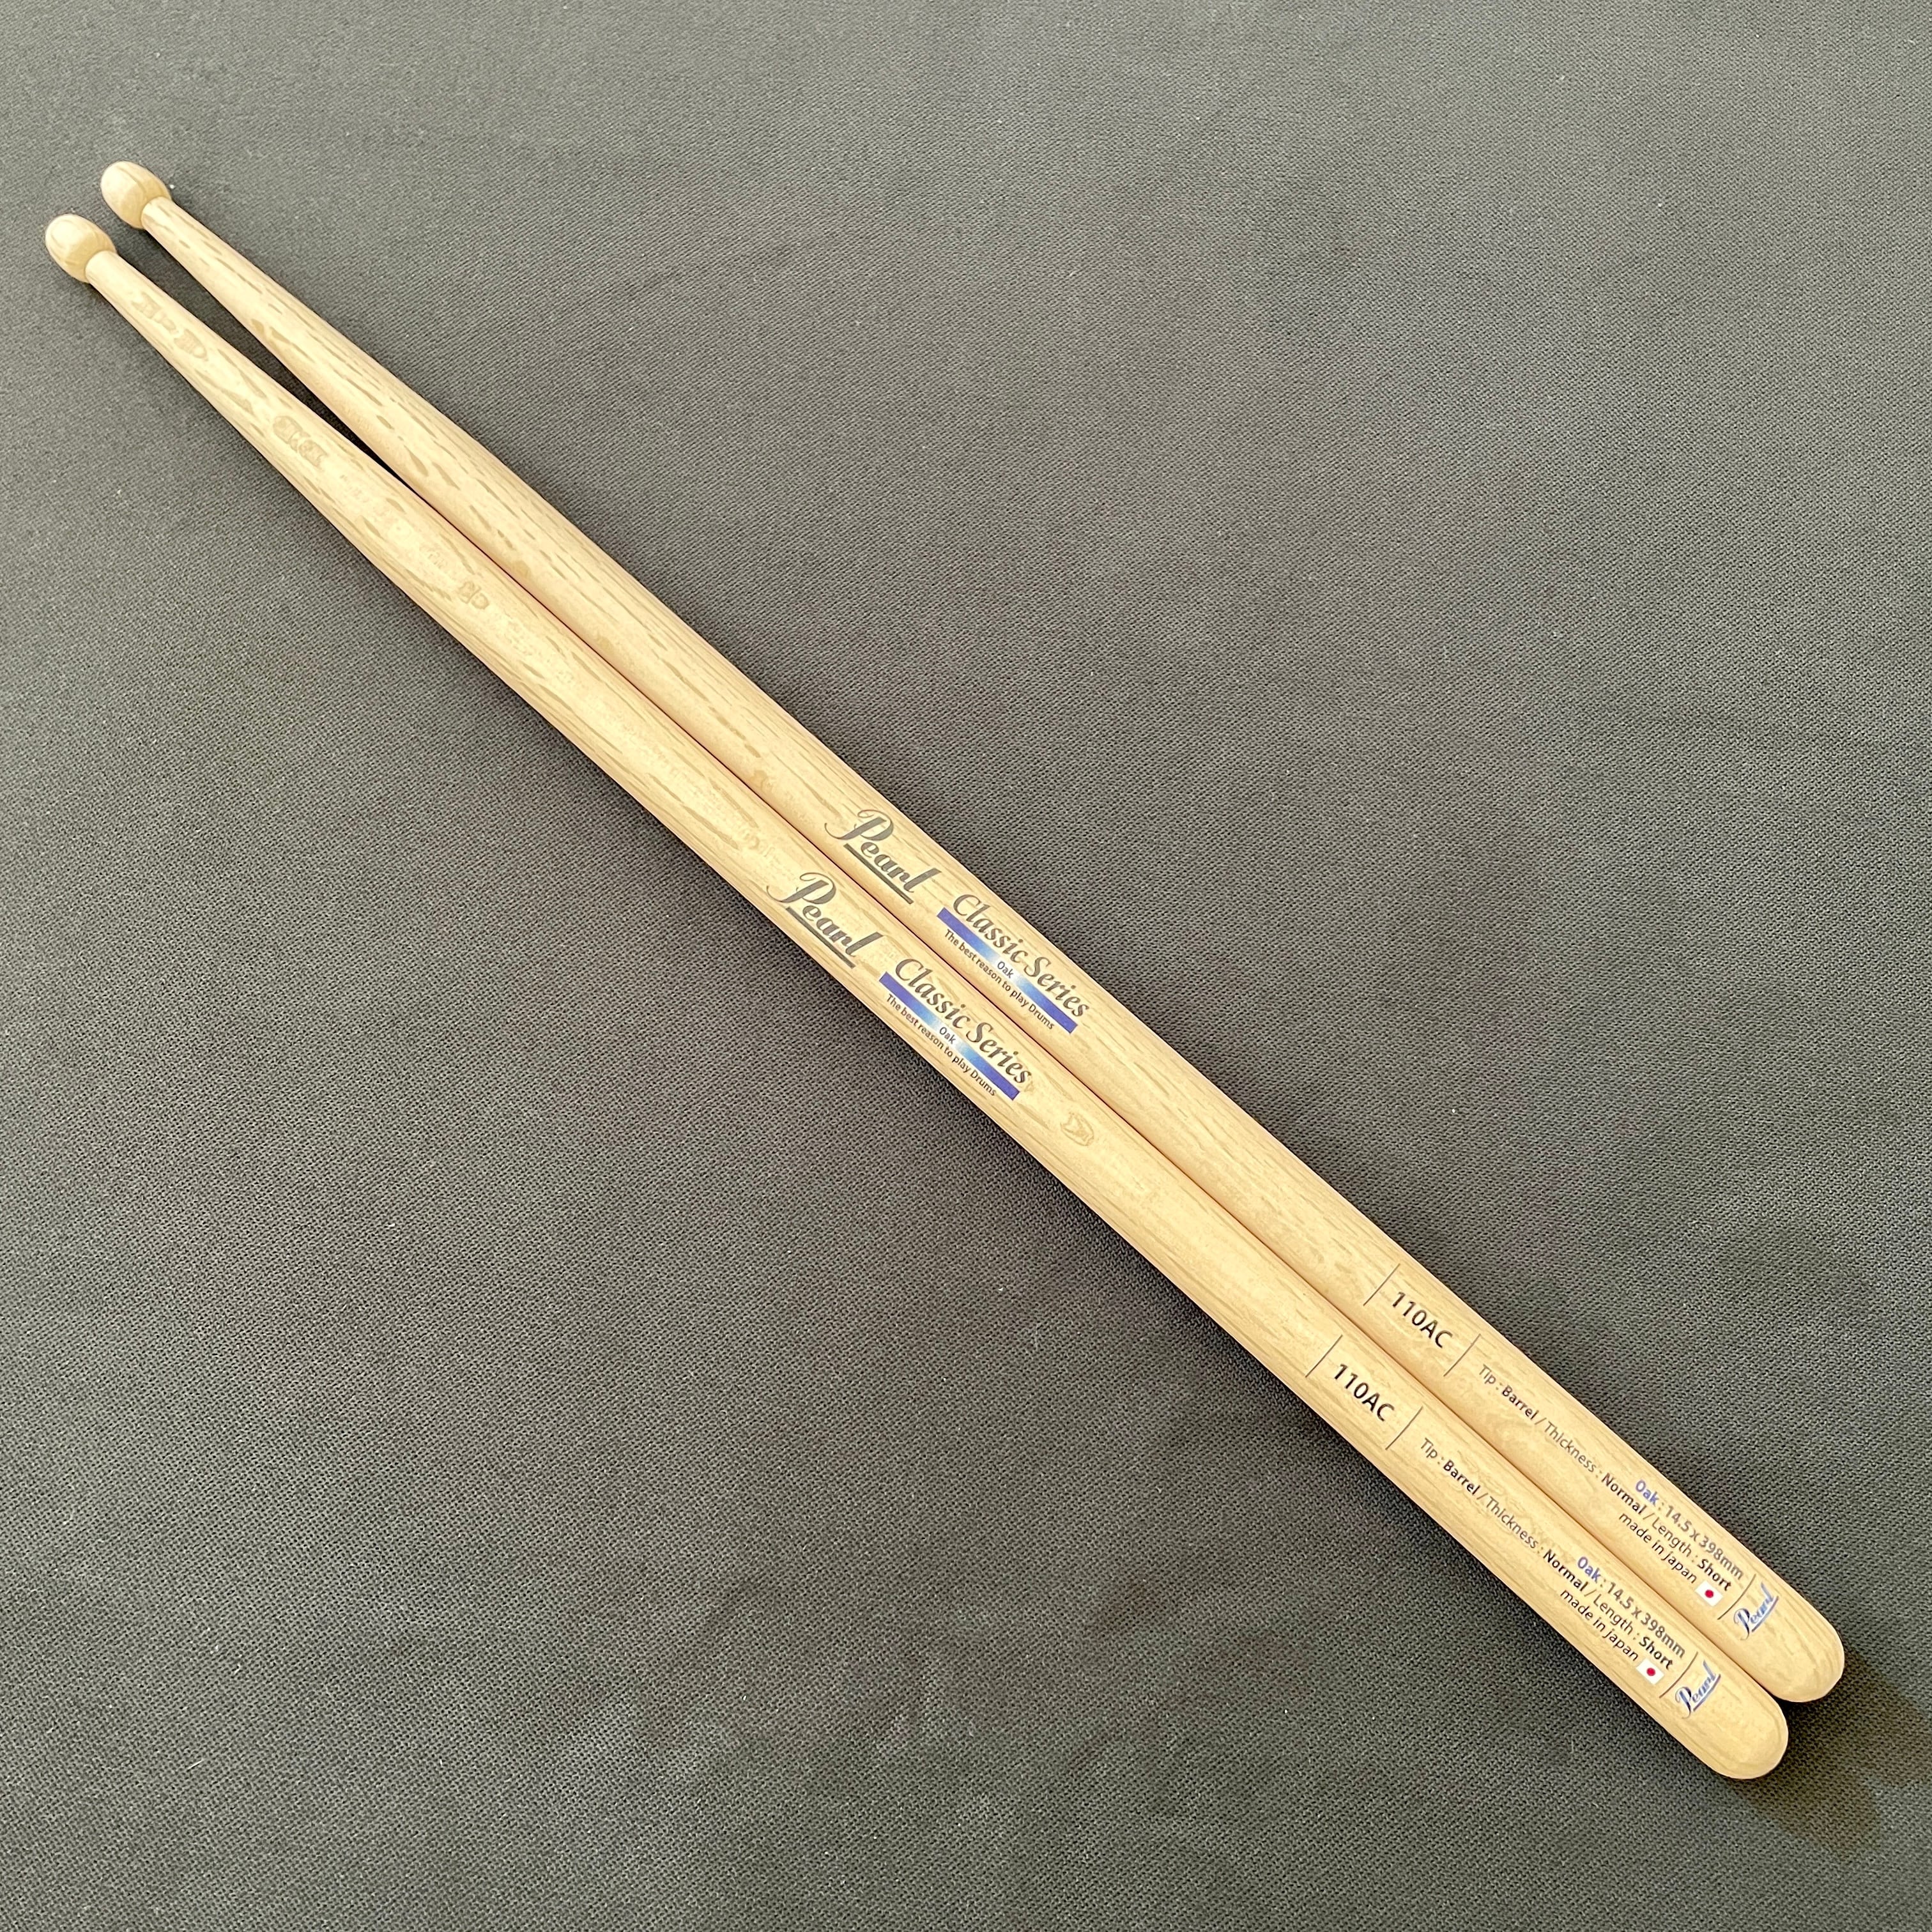 VIC FIRTH American Classic 5A ドラムスティック (VIC-5A) | The Drum